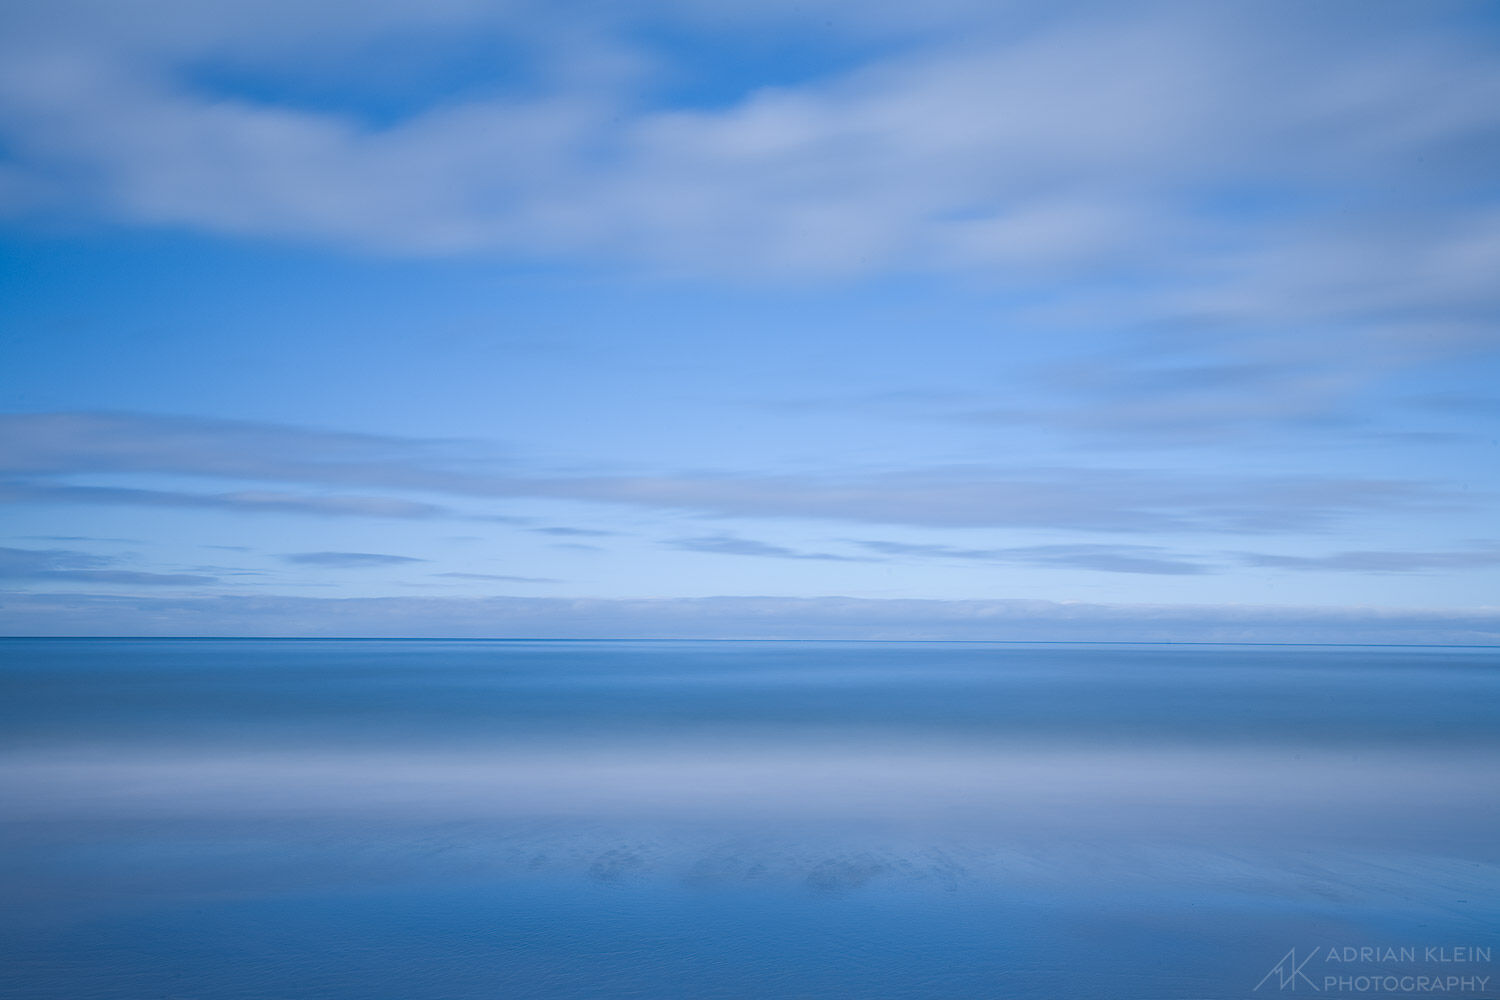 Long exposure midday on the Oregon Coast showing the simple beauty of nature. Limited Edition of 50.